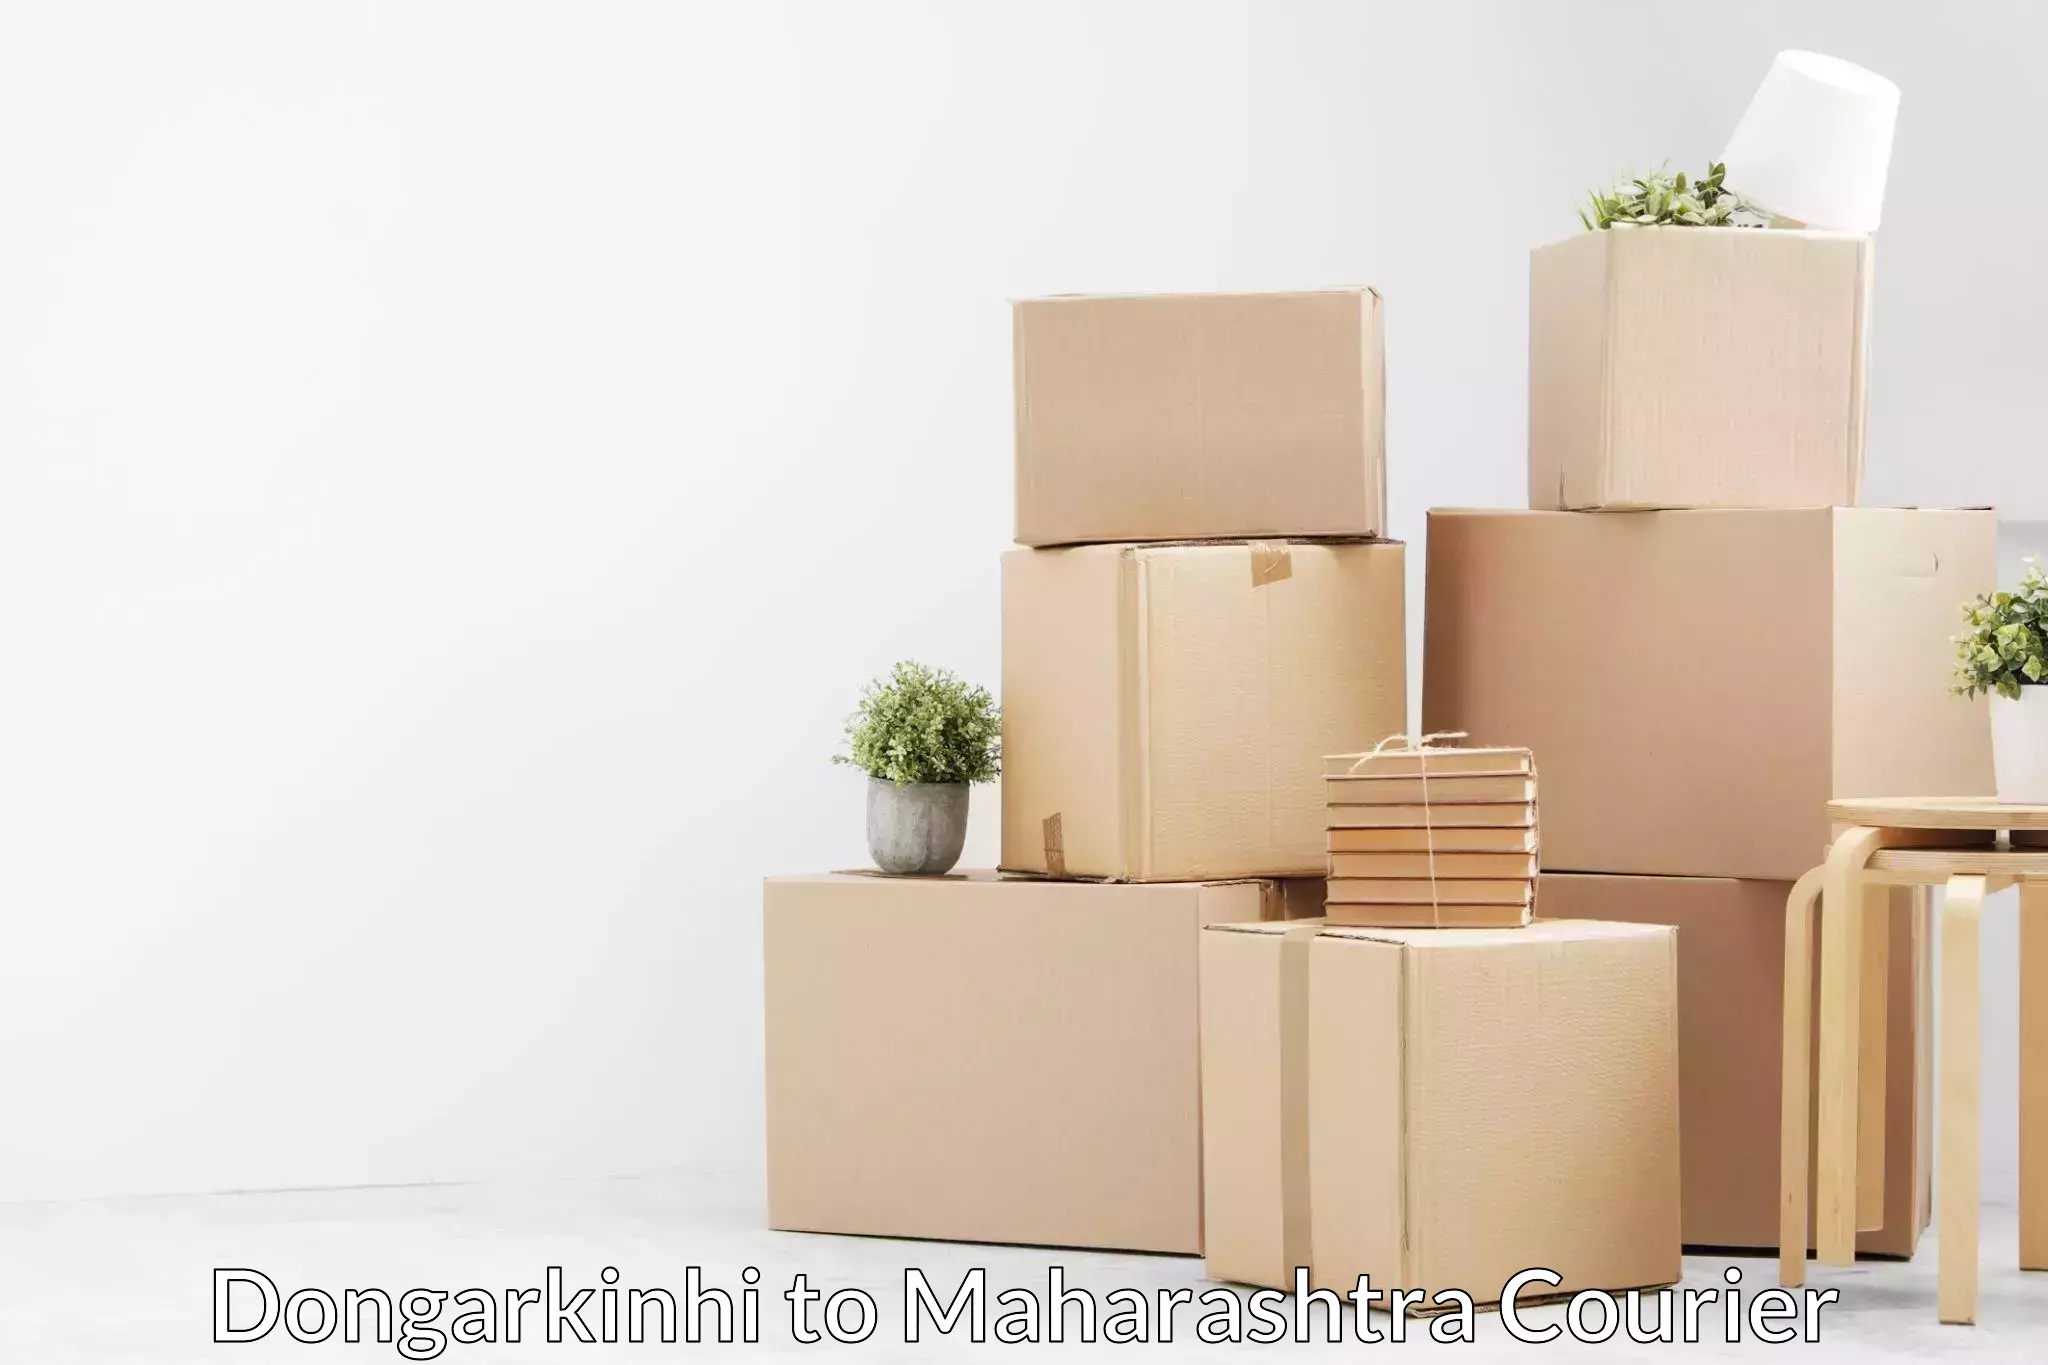 Trusted home movers Dongarkinhi to Worli